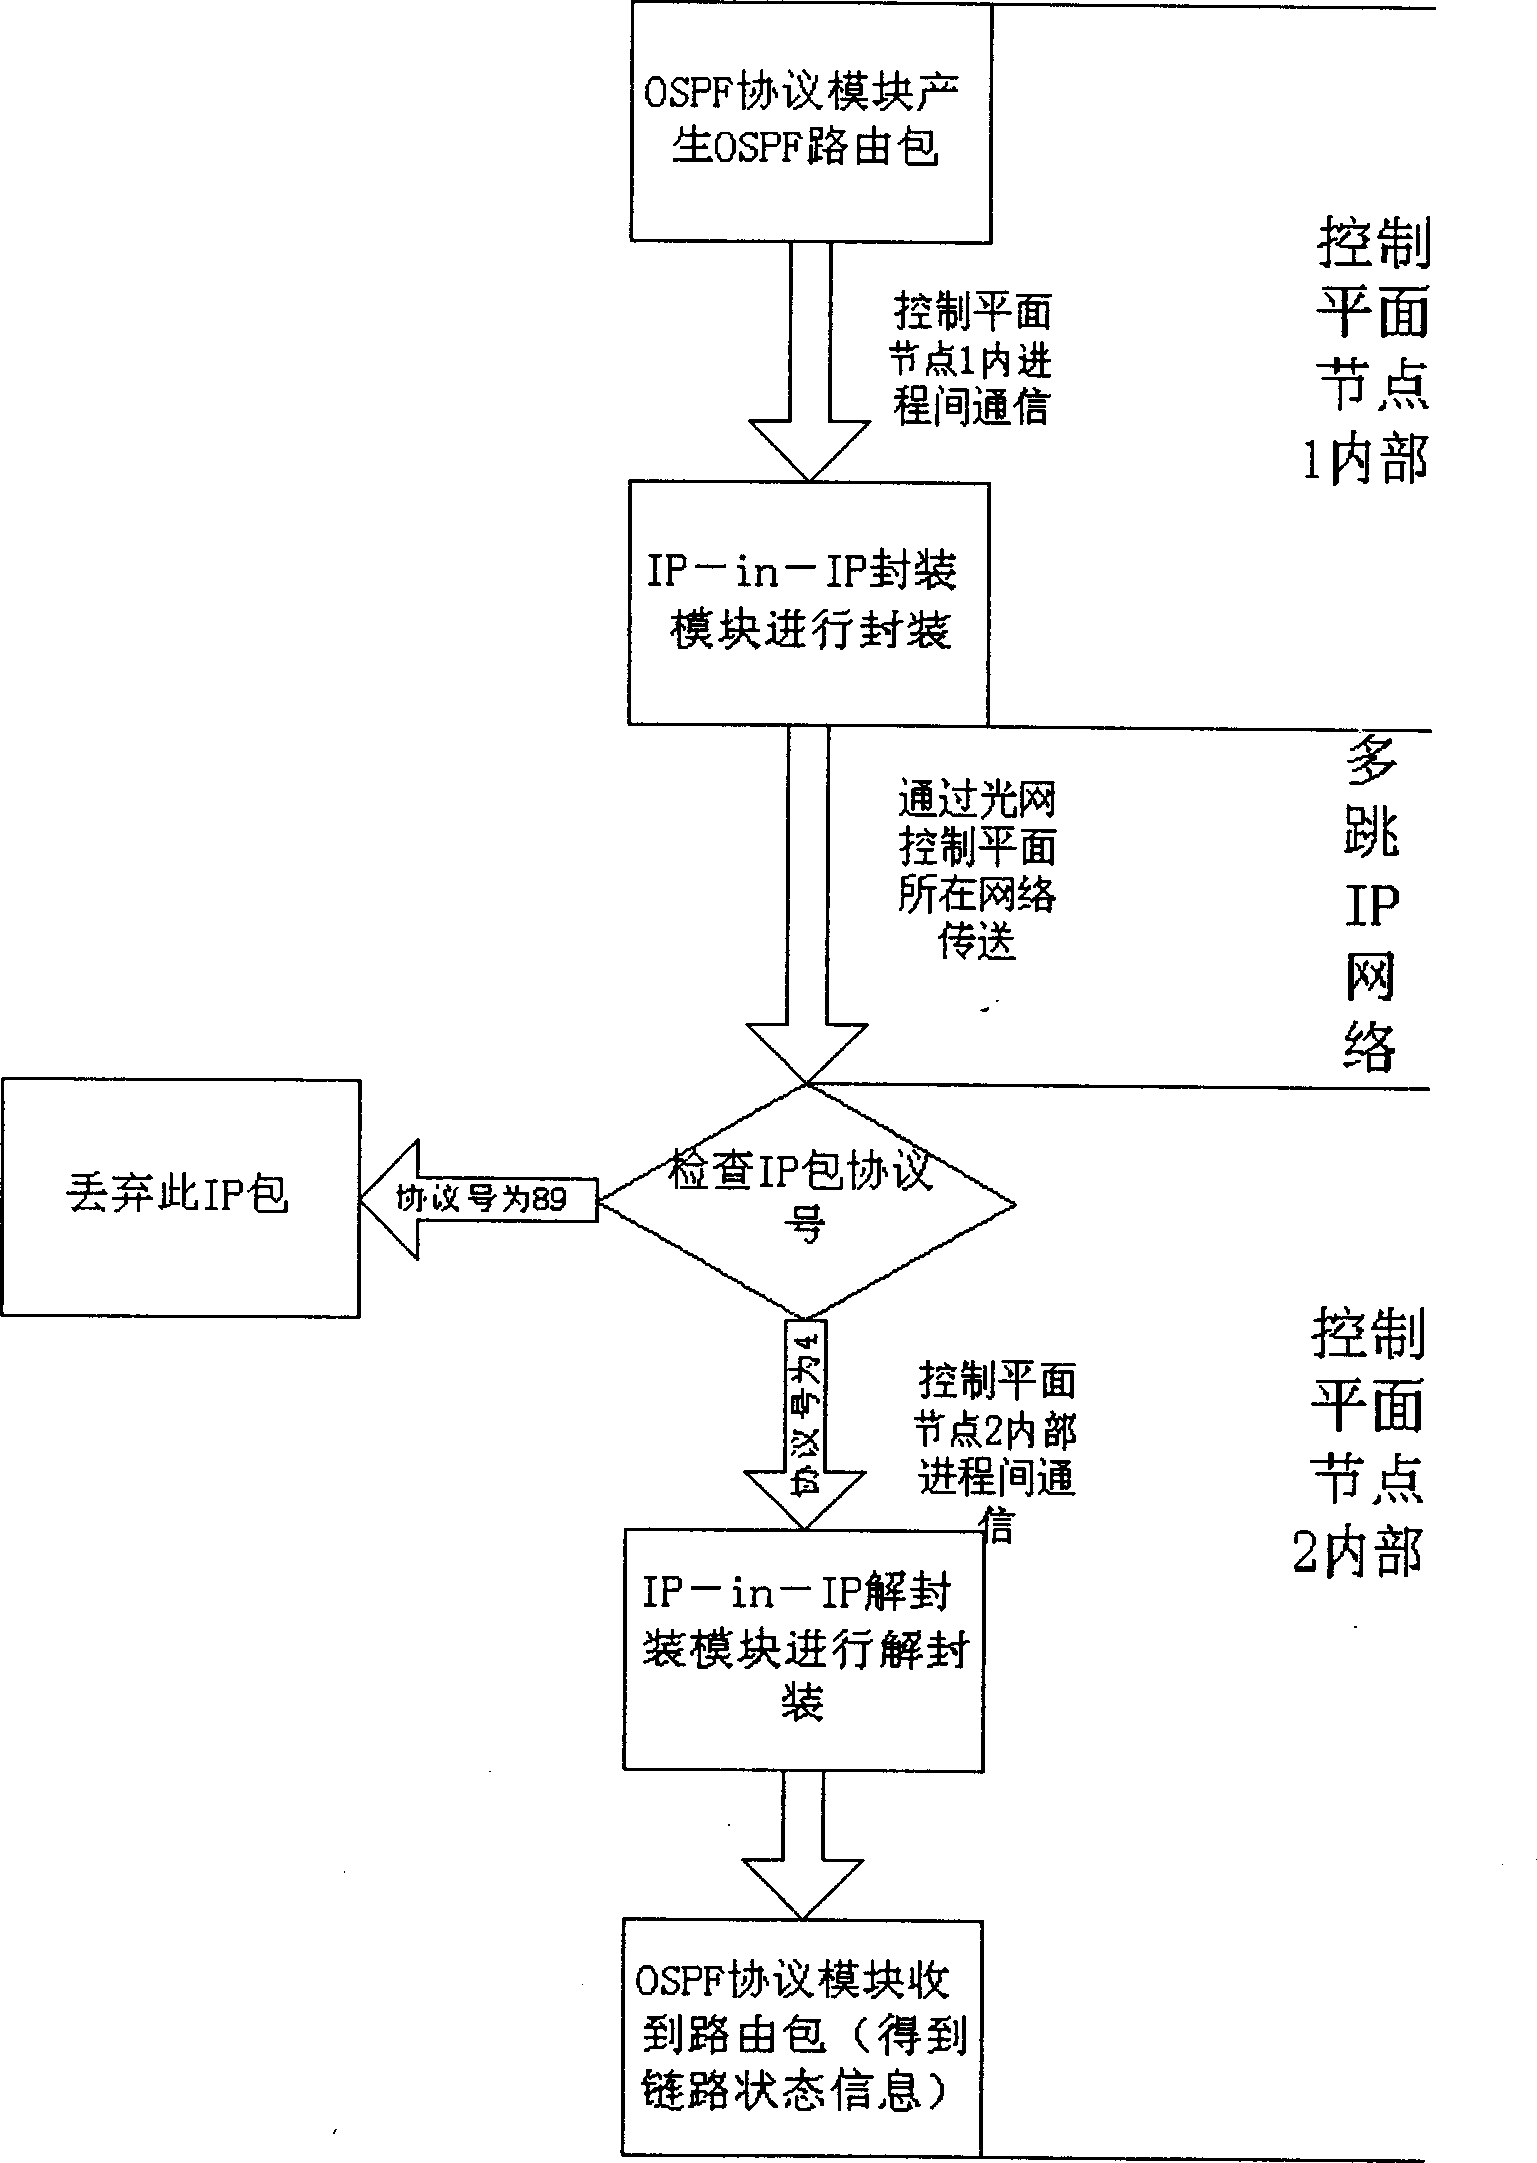 Method for delivering link state information to pass through network